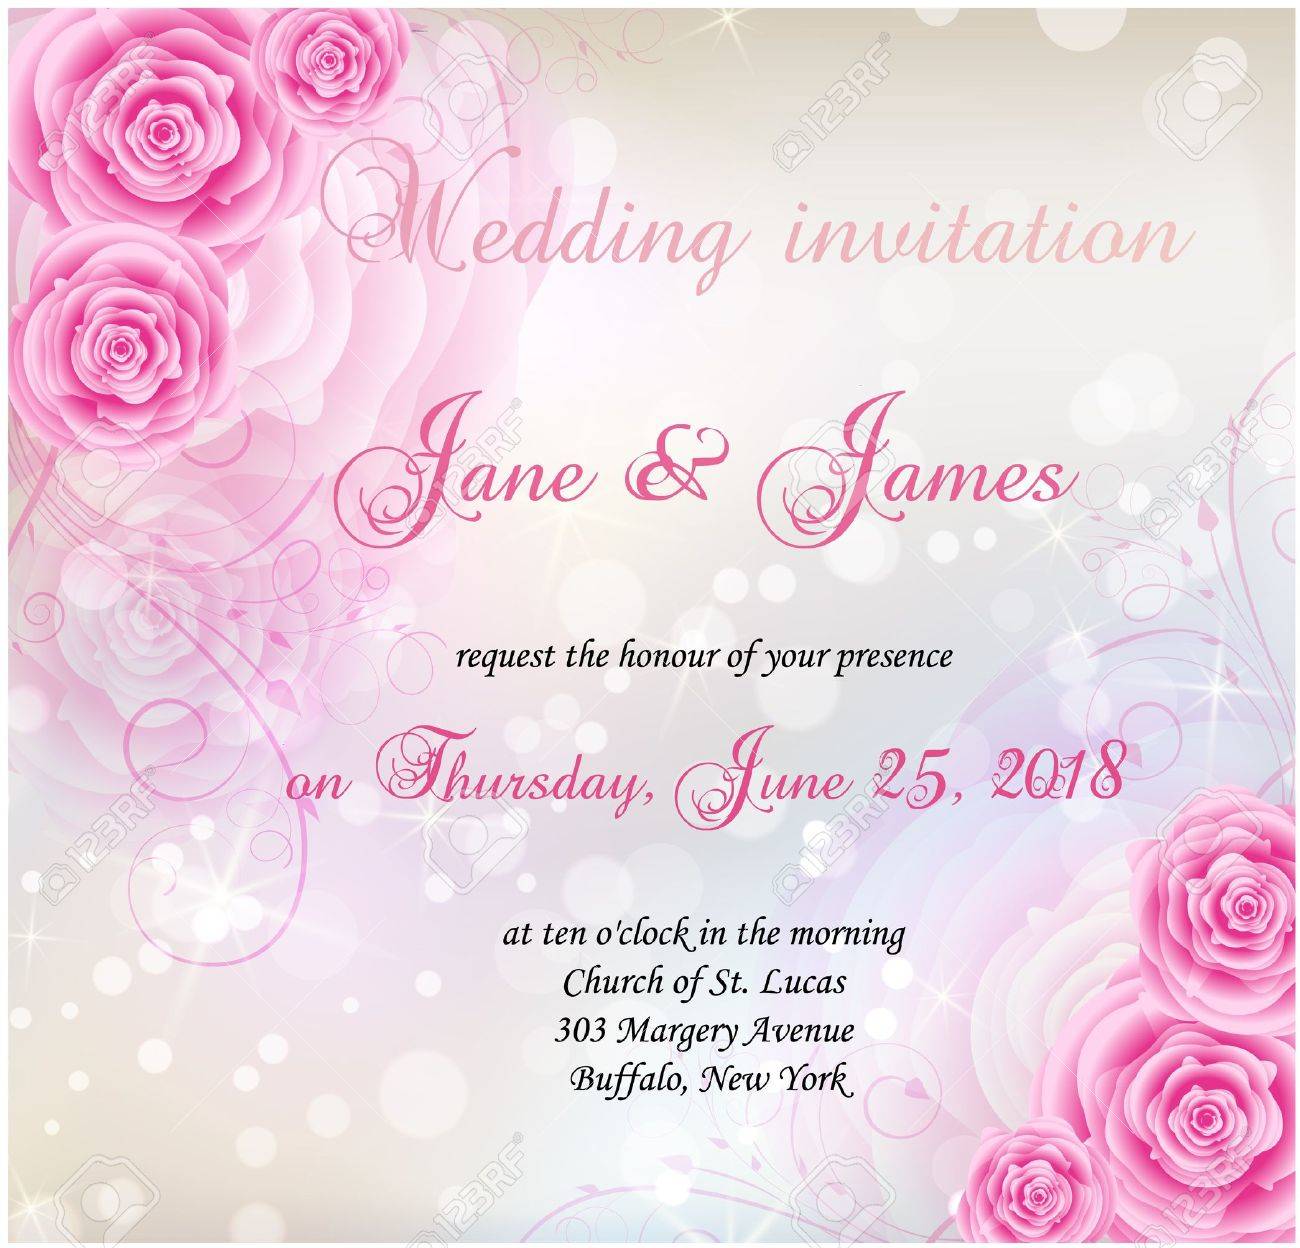 Wedding Invitation With Pink Roses Background And Floral Swirls